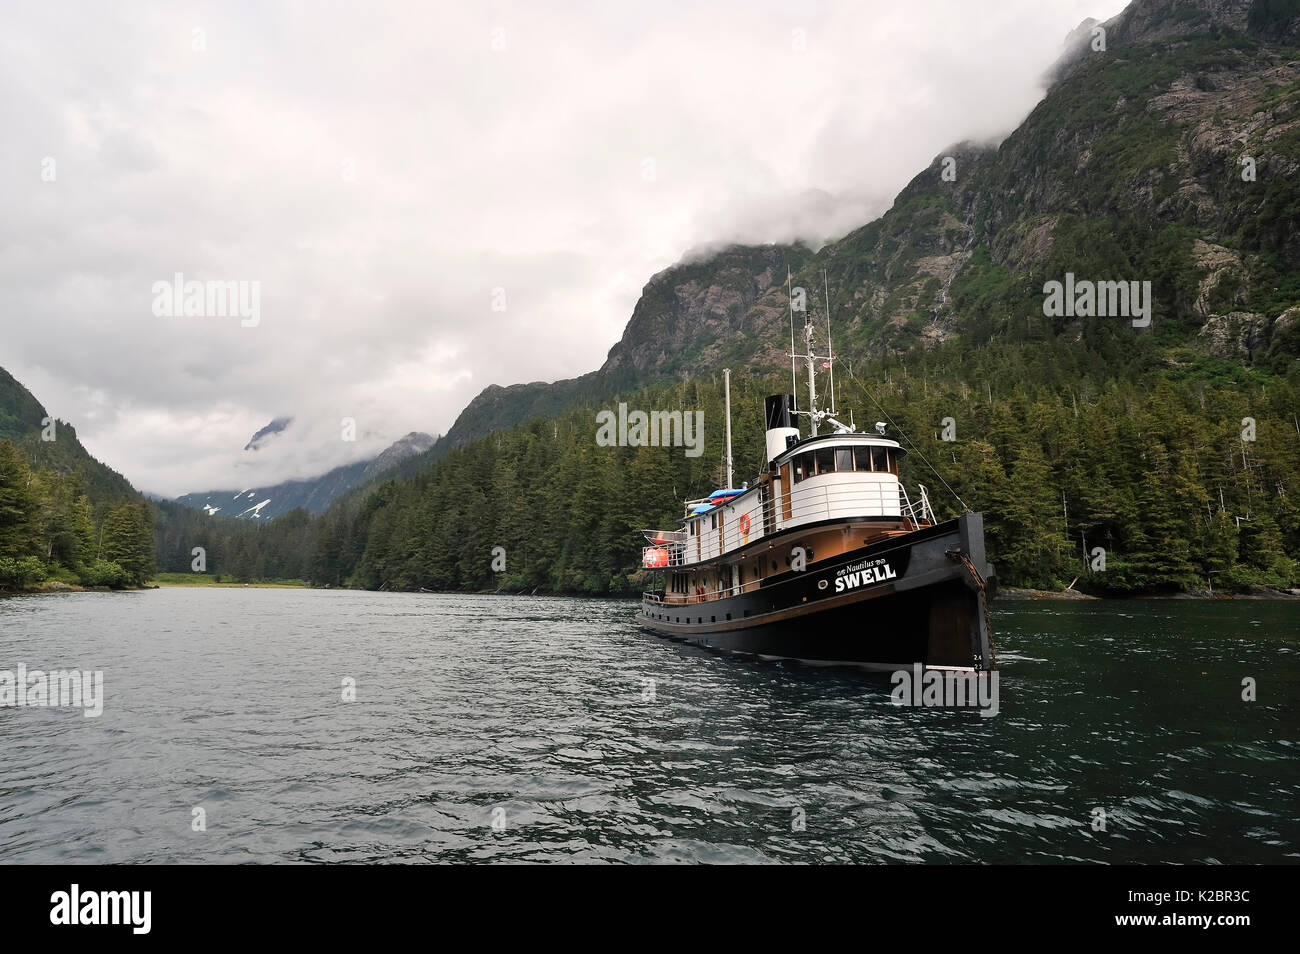 The Nautilus Swell, a former tug built in 1912 which has been completely refitted and is now a liveaboard dive boat in a bay of Alexander Archipelago. Gulf of Alaska, Pacific Ocean. All non-editorial uses must be cleared individually. Stock Photo